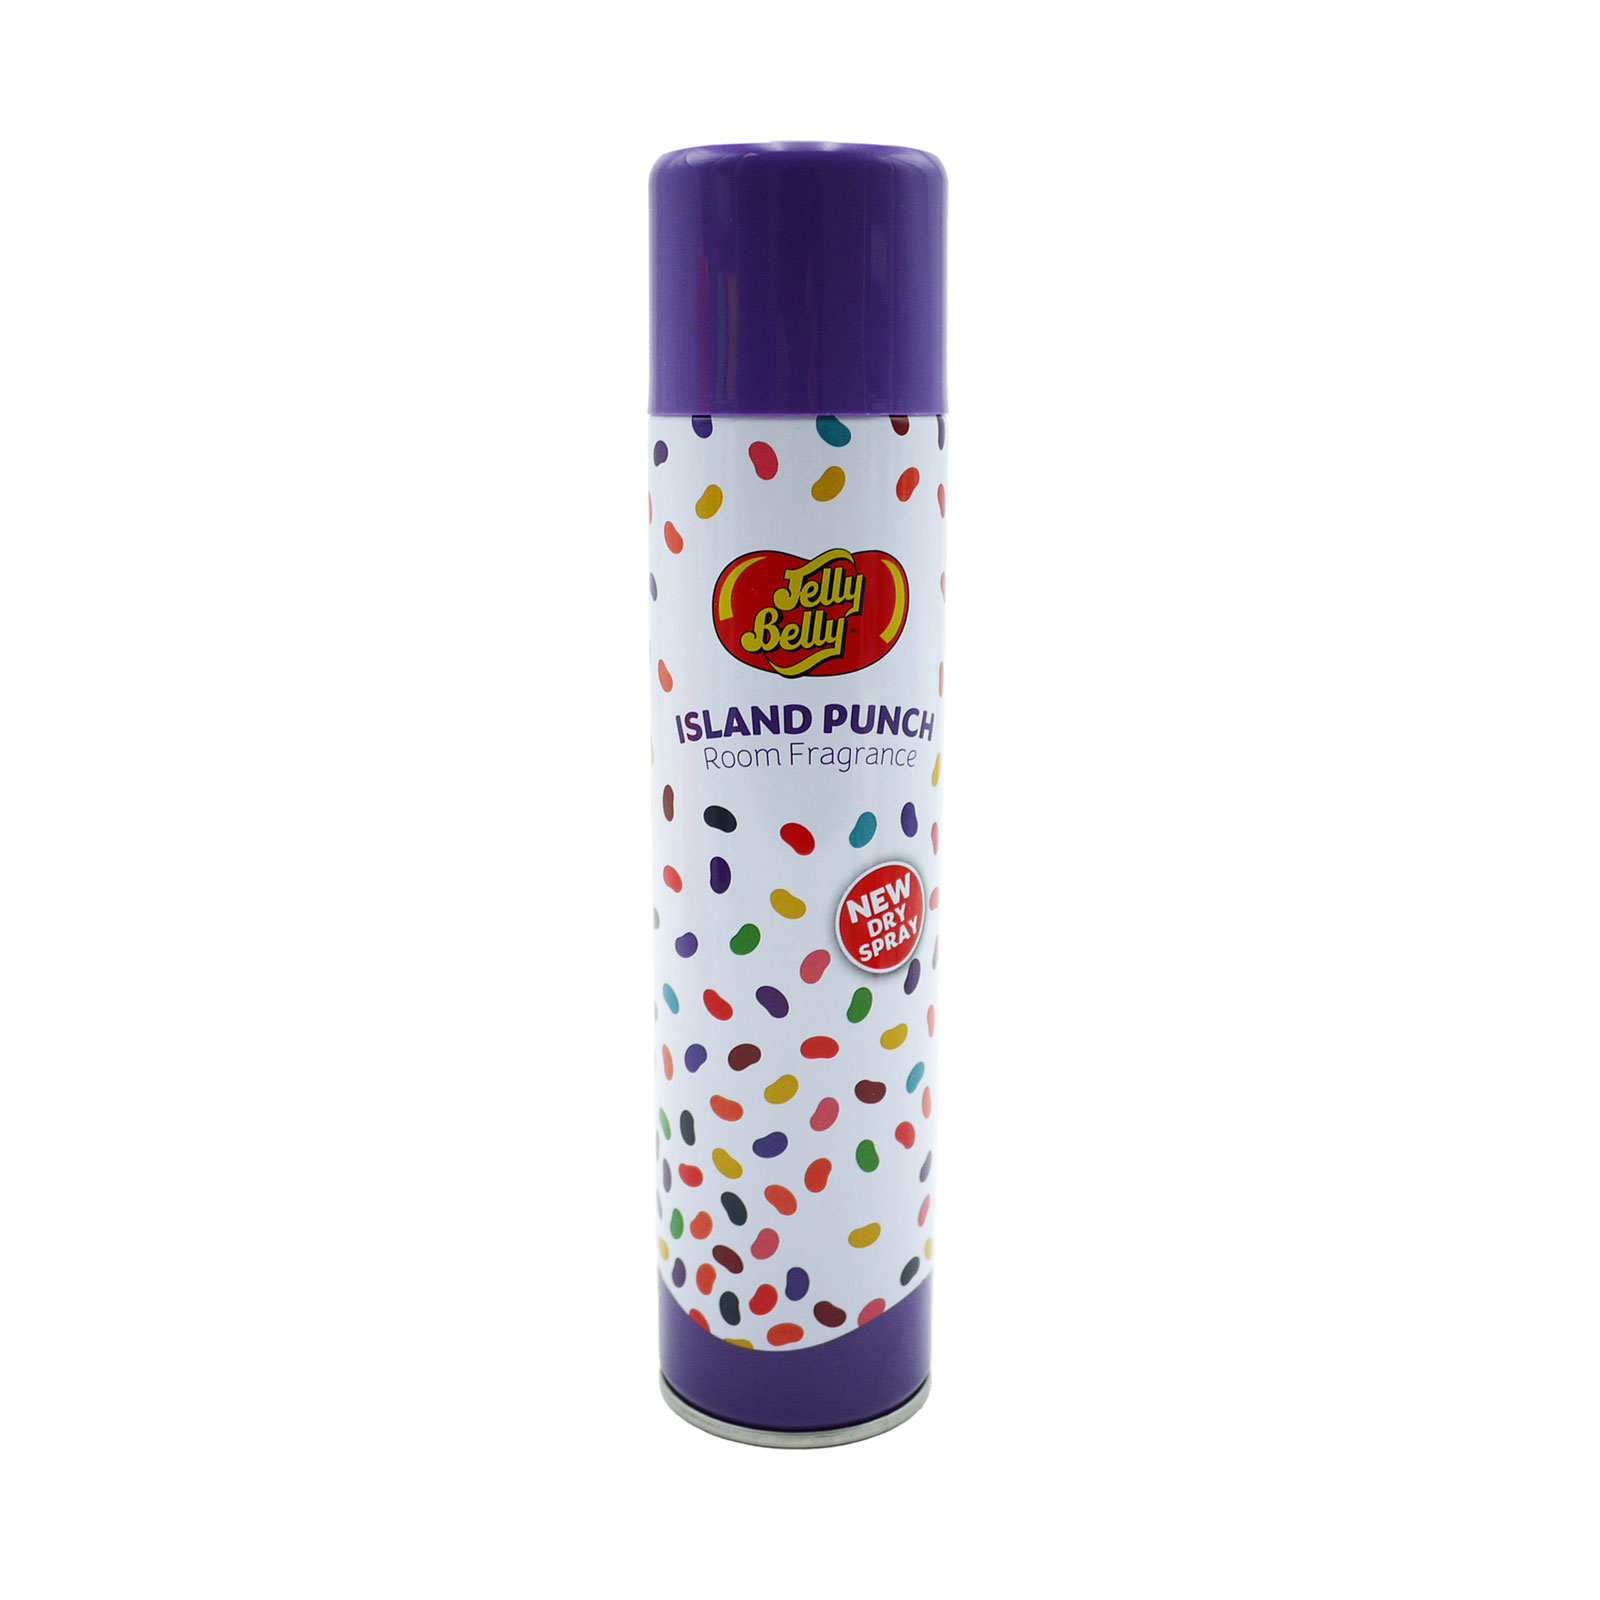 Jelly Belly Island Punch Room Fragrance 250ml